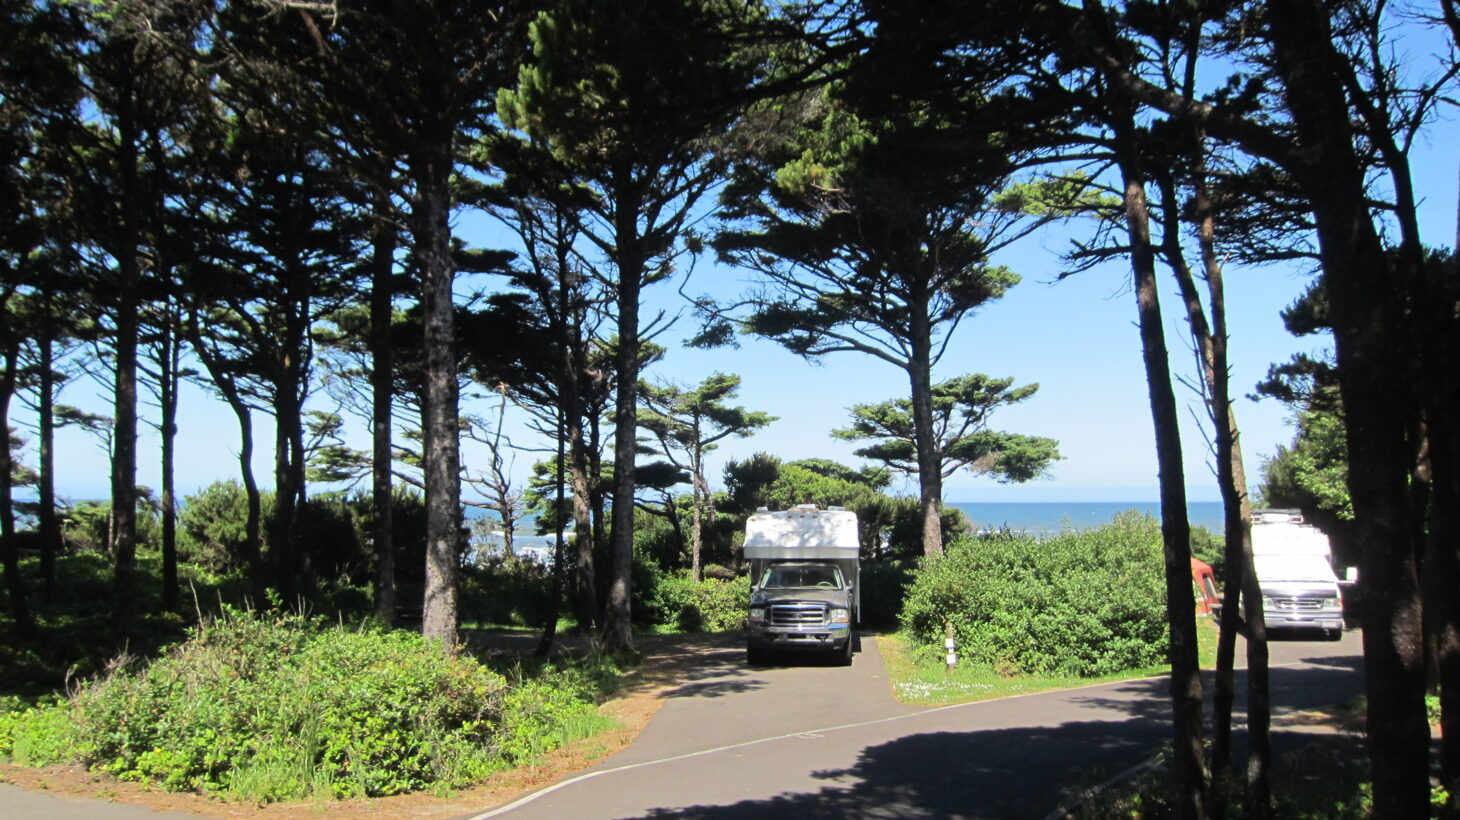 An RV parked between several towering trees with a large body of water in the distance